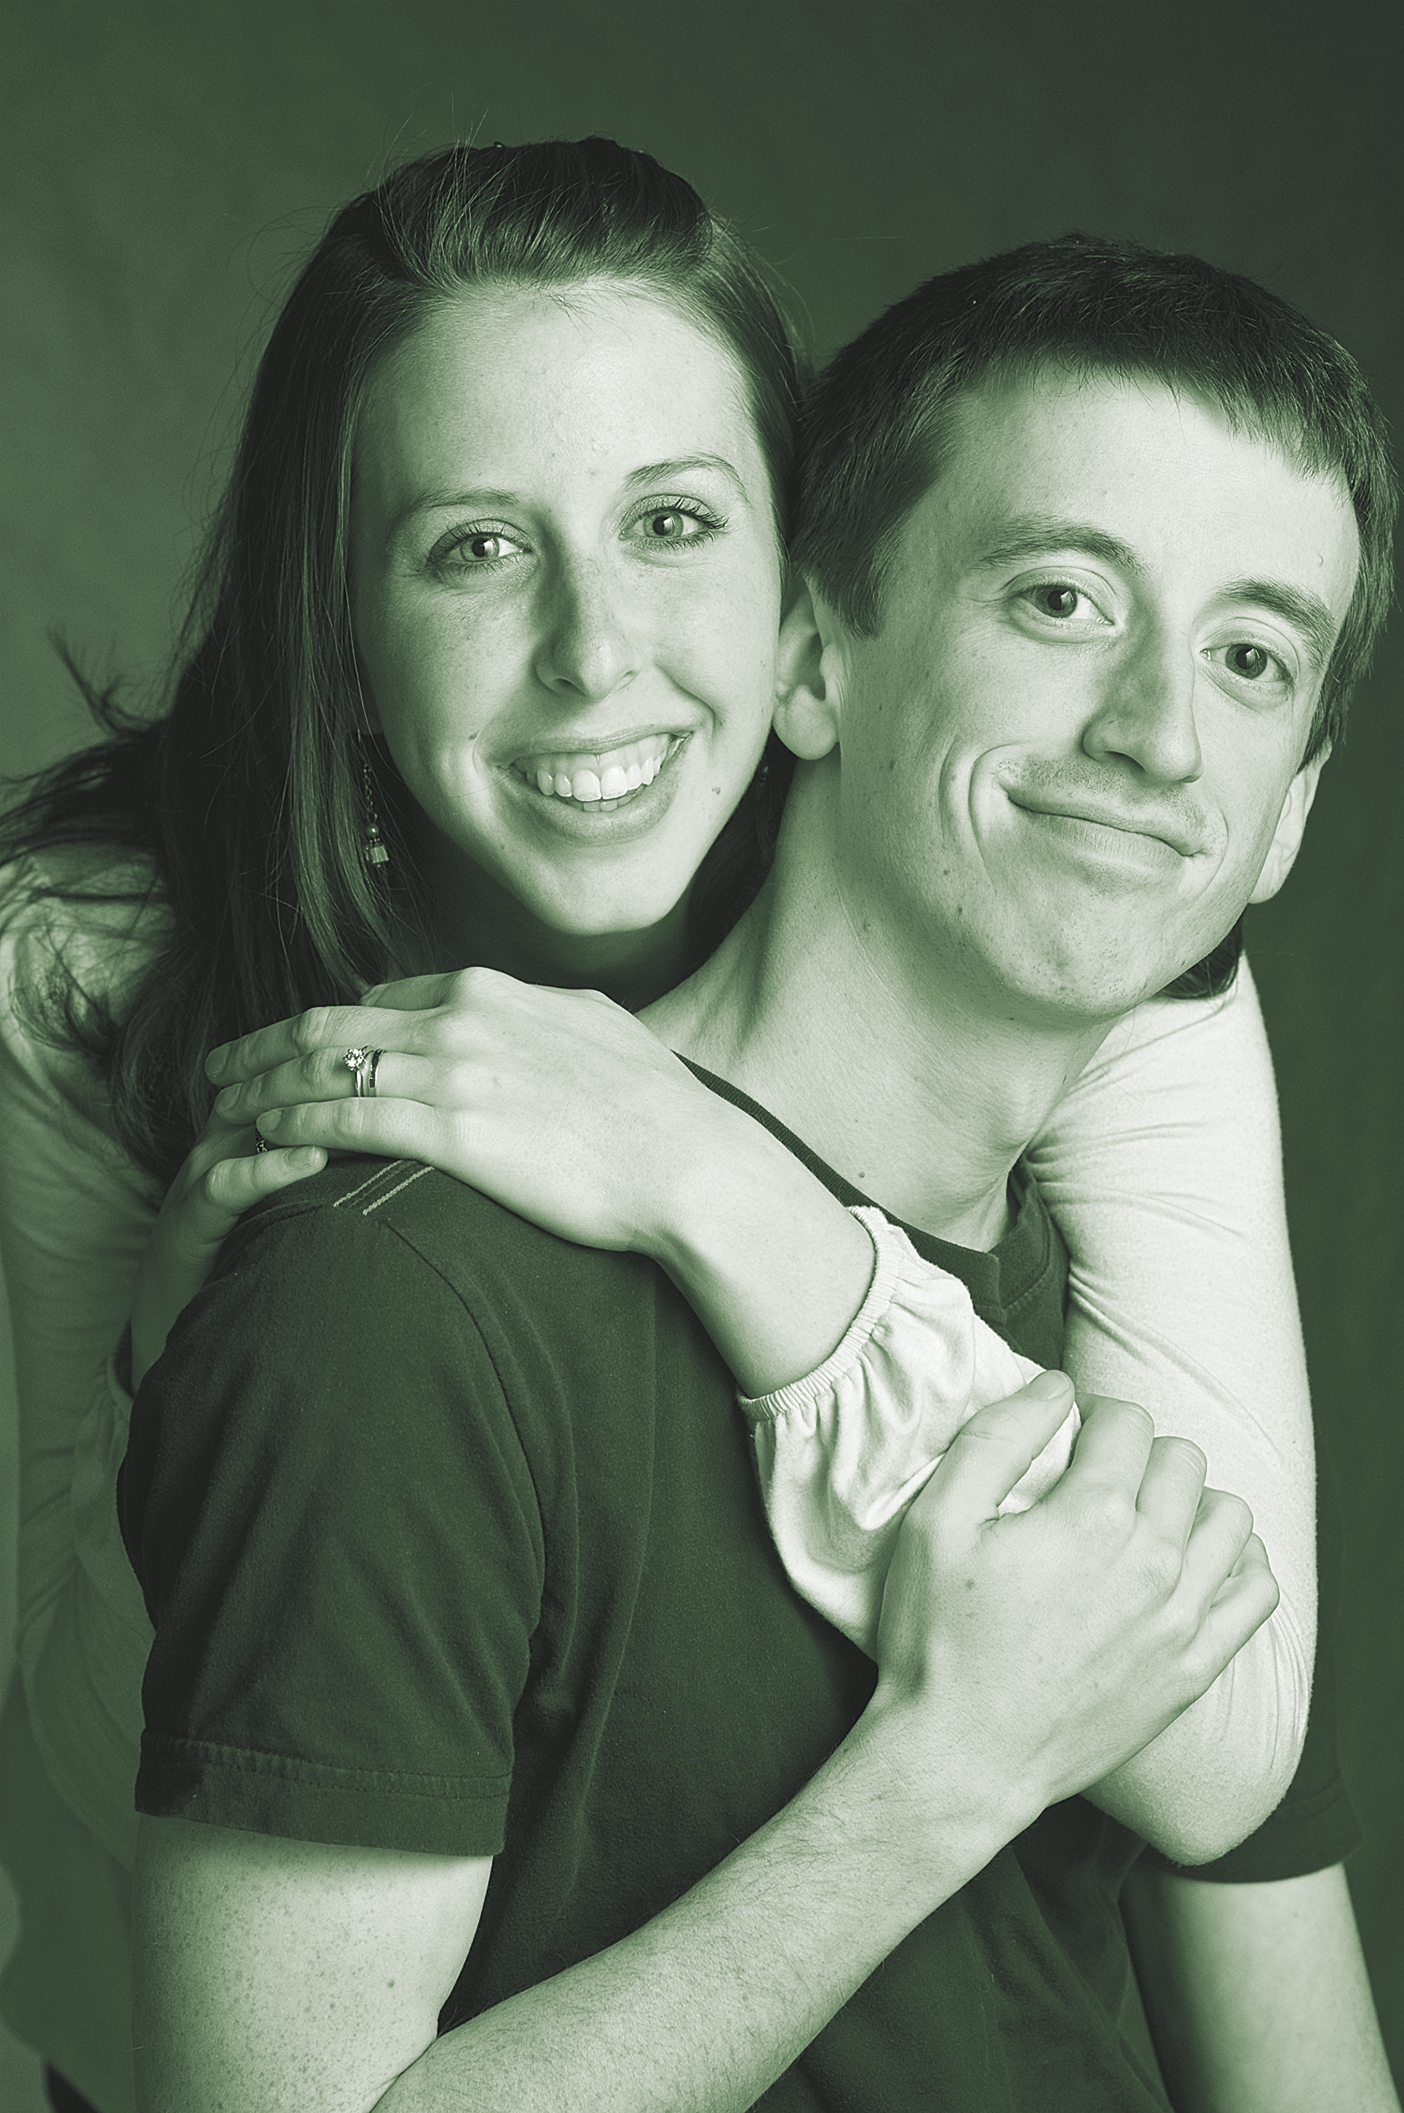 A young couple poses for a portrait